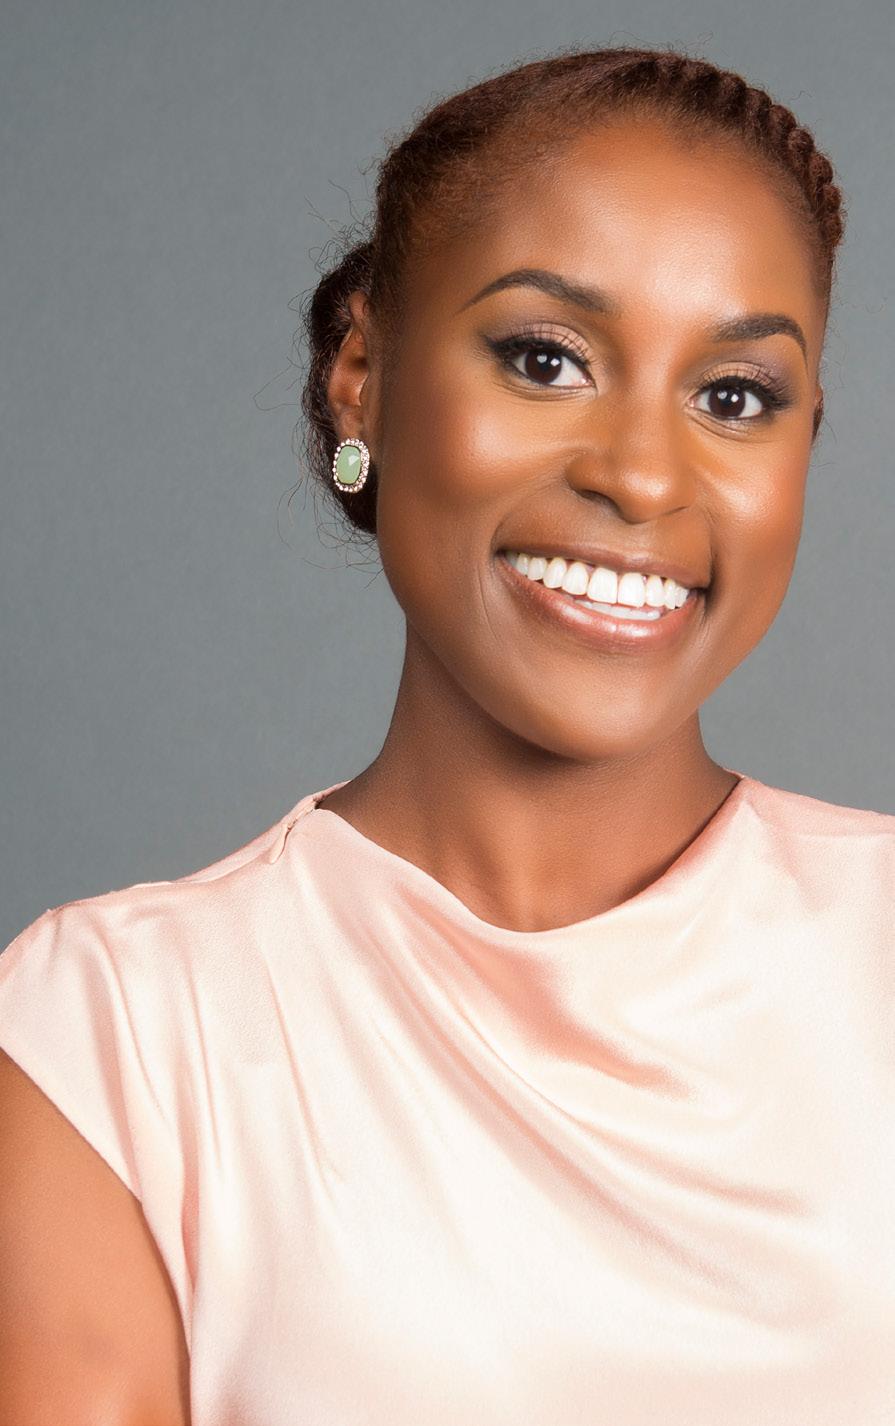 INDUSTRY ICONOCLAST Issa Rae Issa Rae Productions Issa Rae, known for her hit HBO comedy Insecure, is the first black woman to create and star in a premium cable